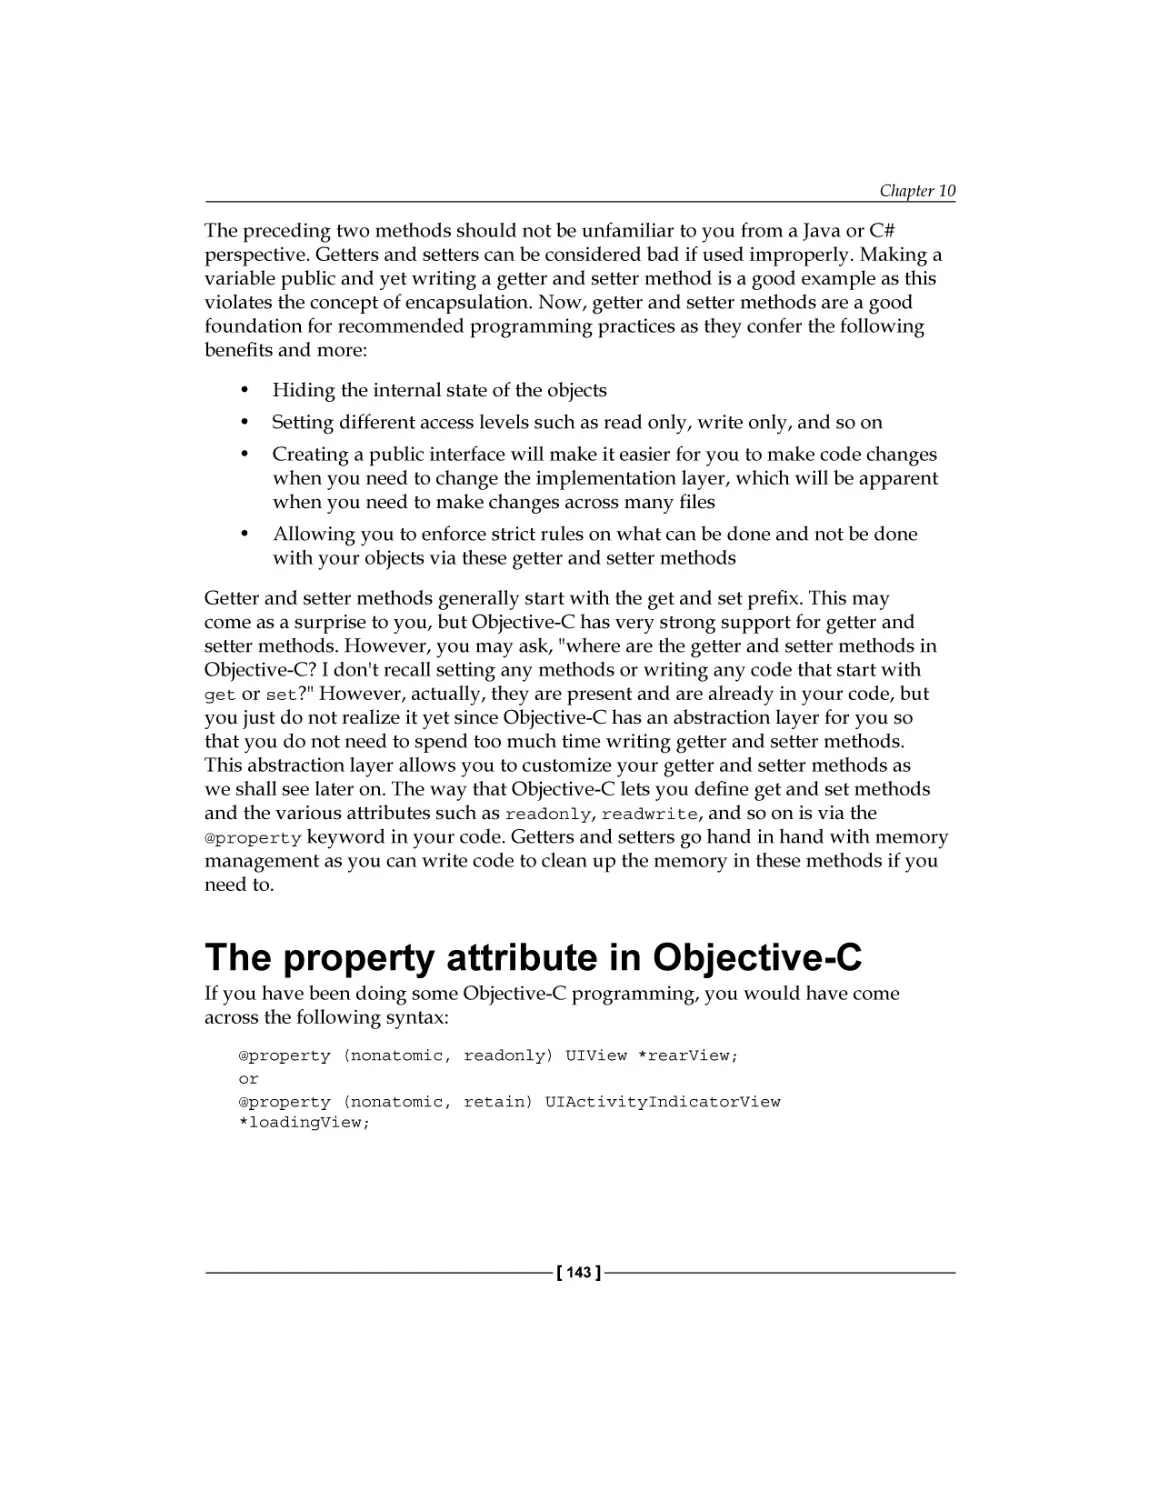 The property attribute in Objective-C